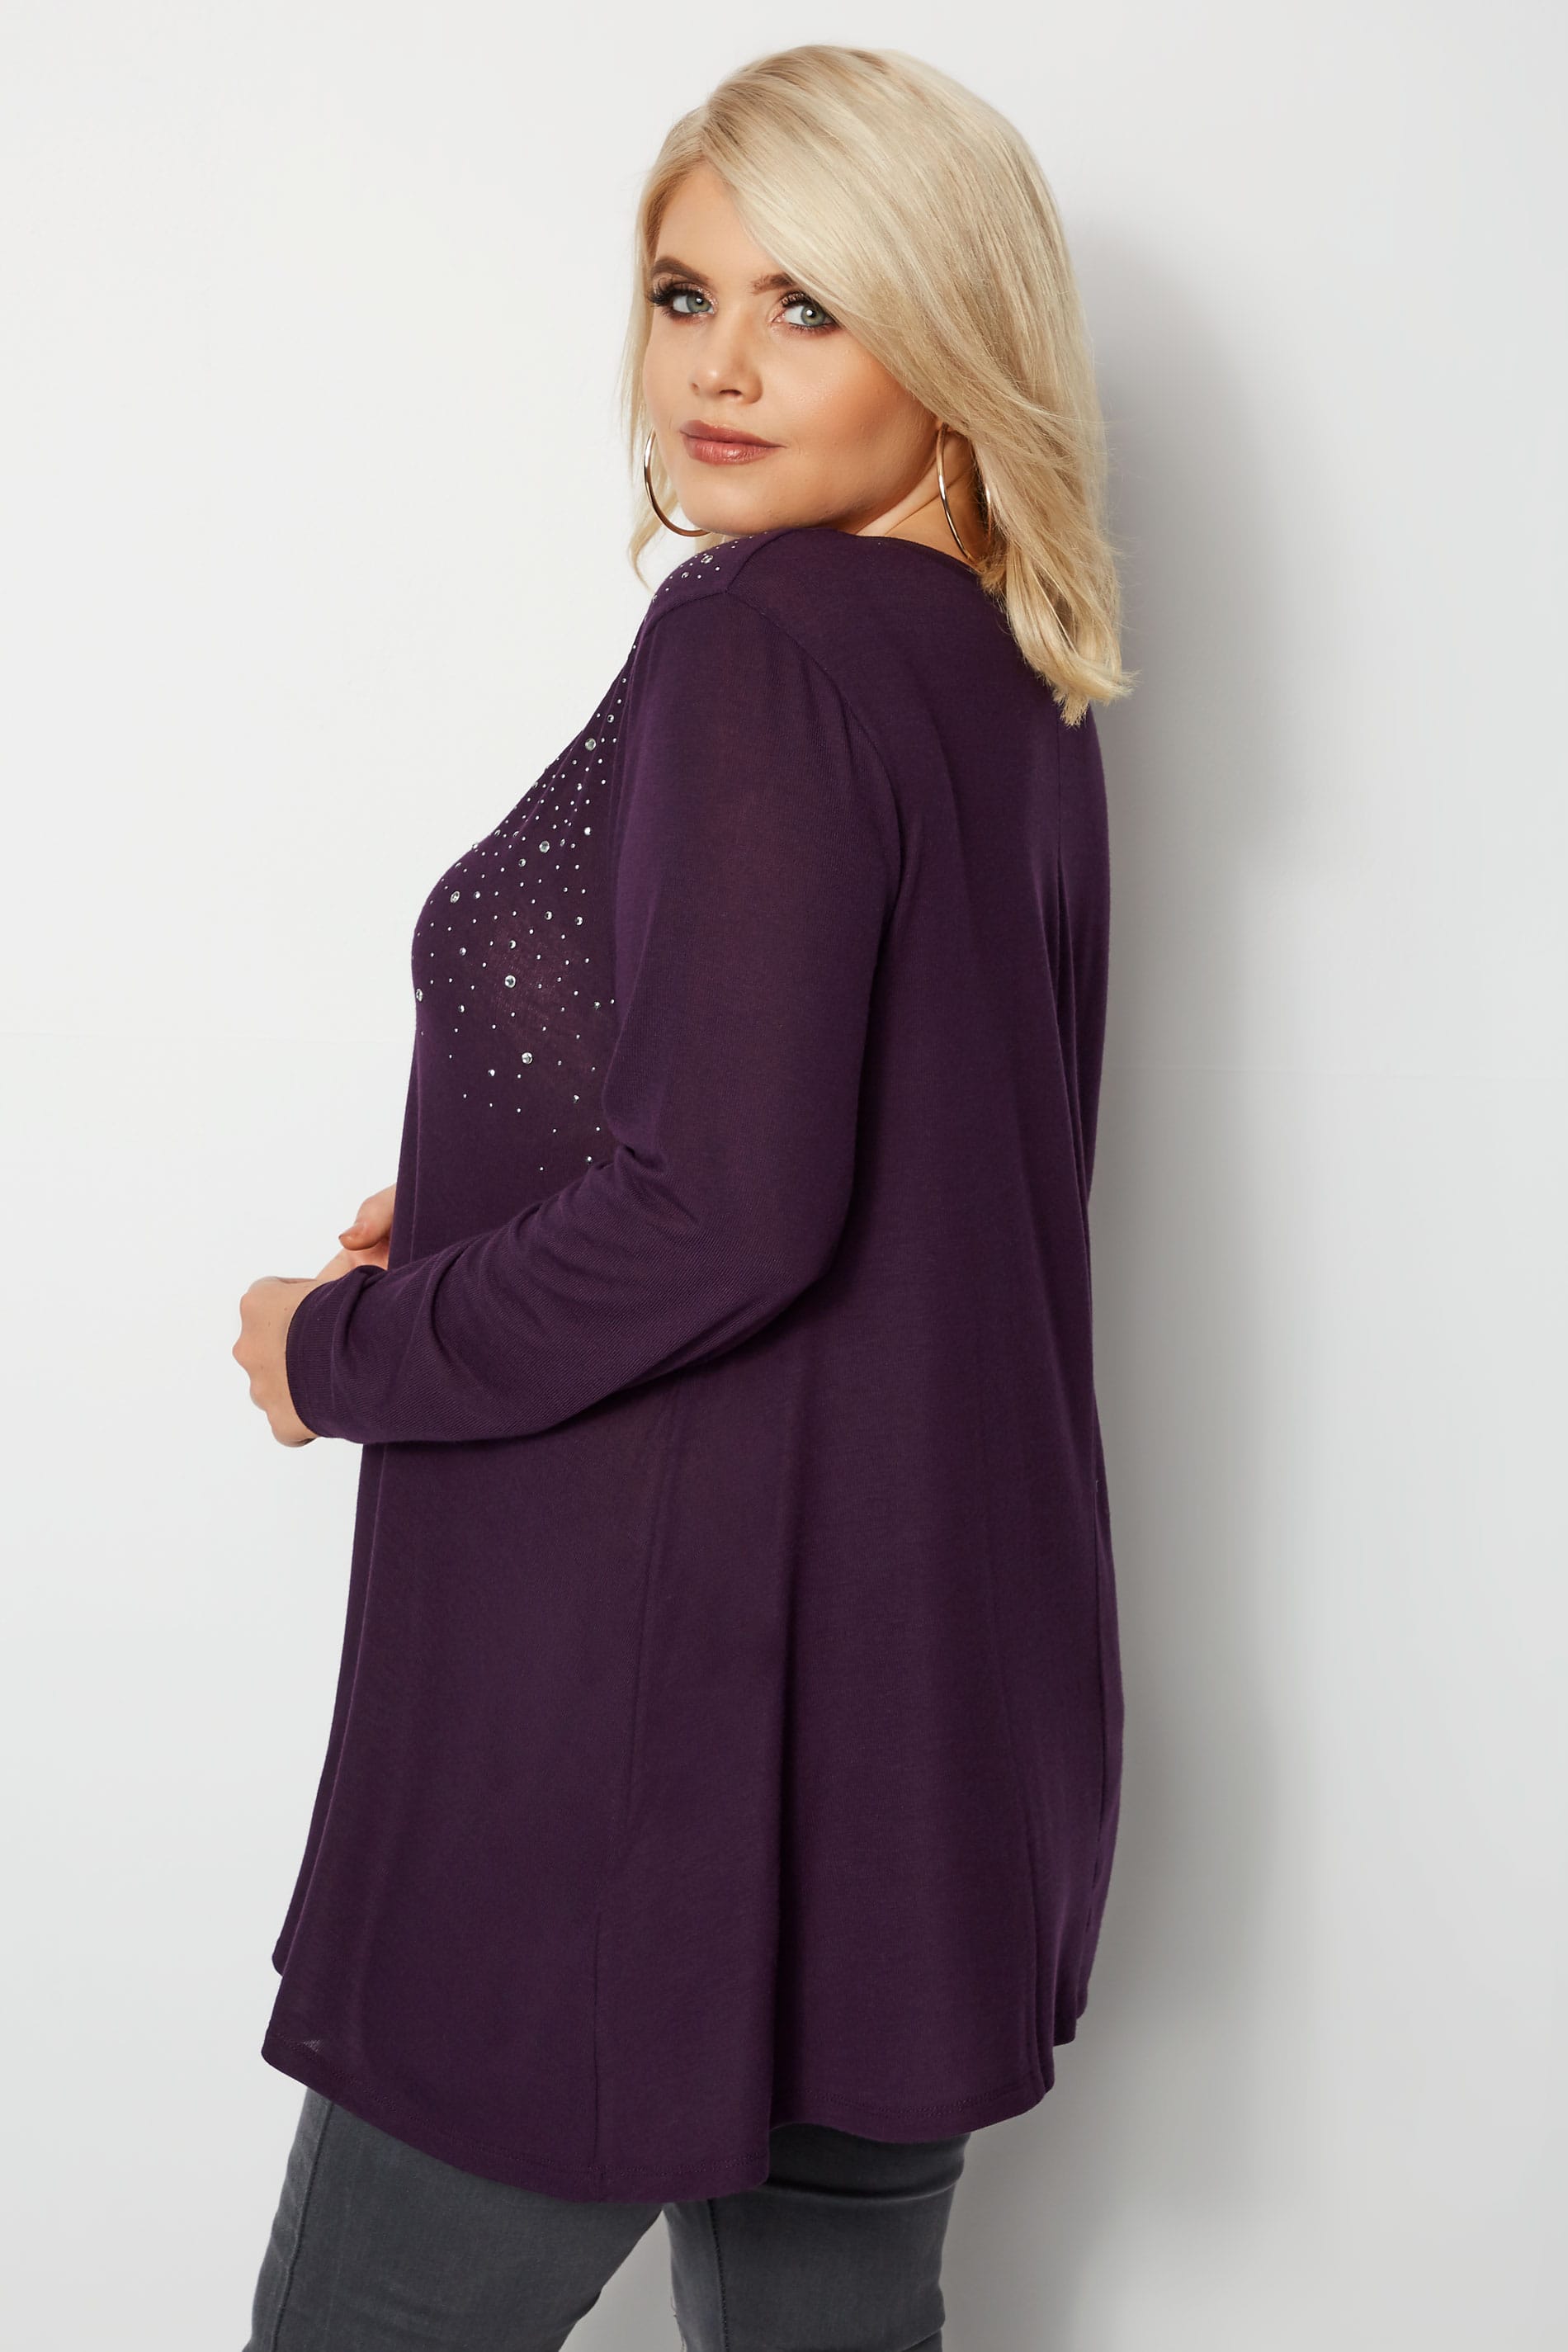 Purple Studded Swing Top, Plus size 16 to 36